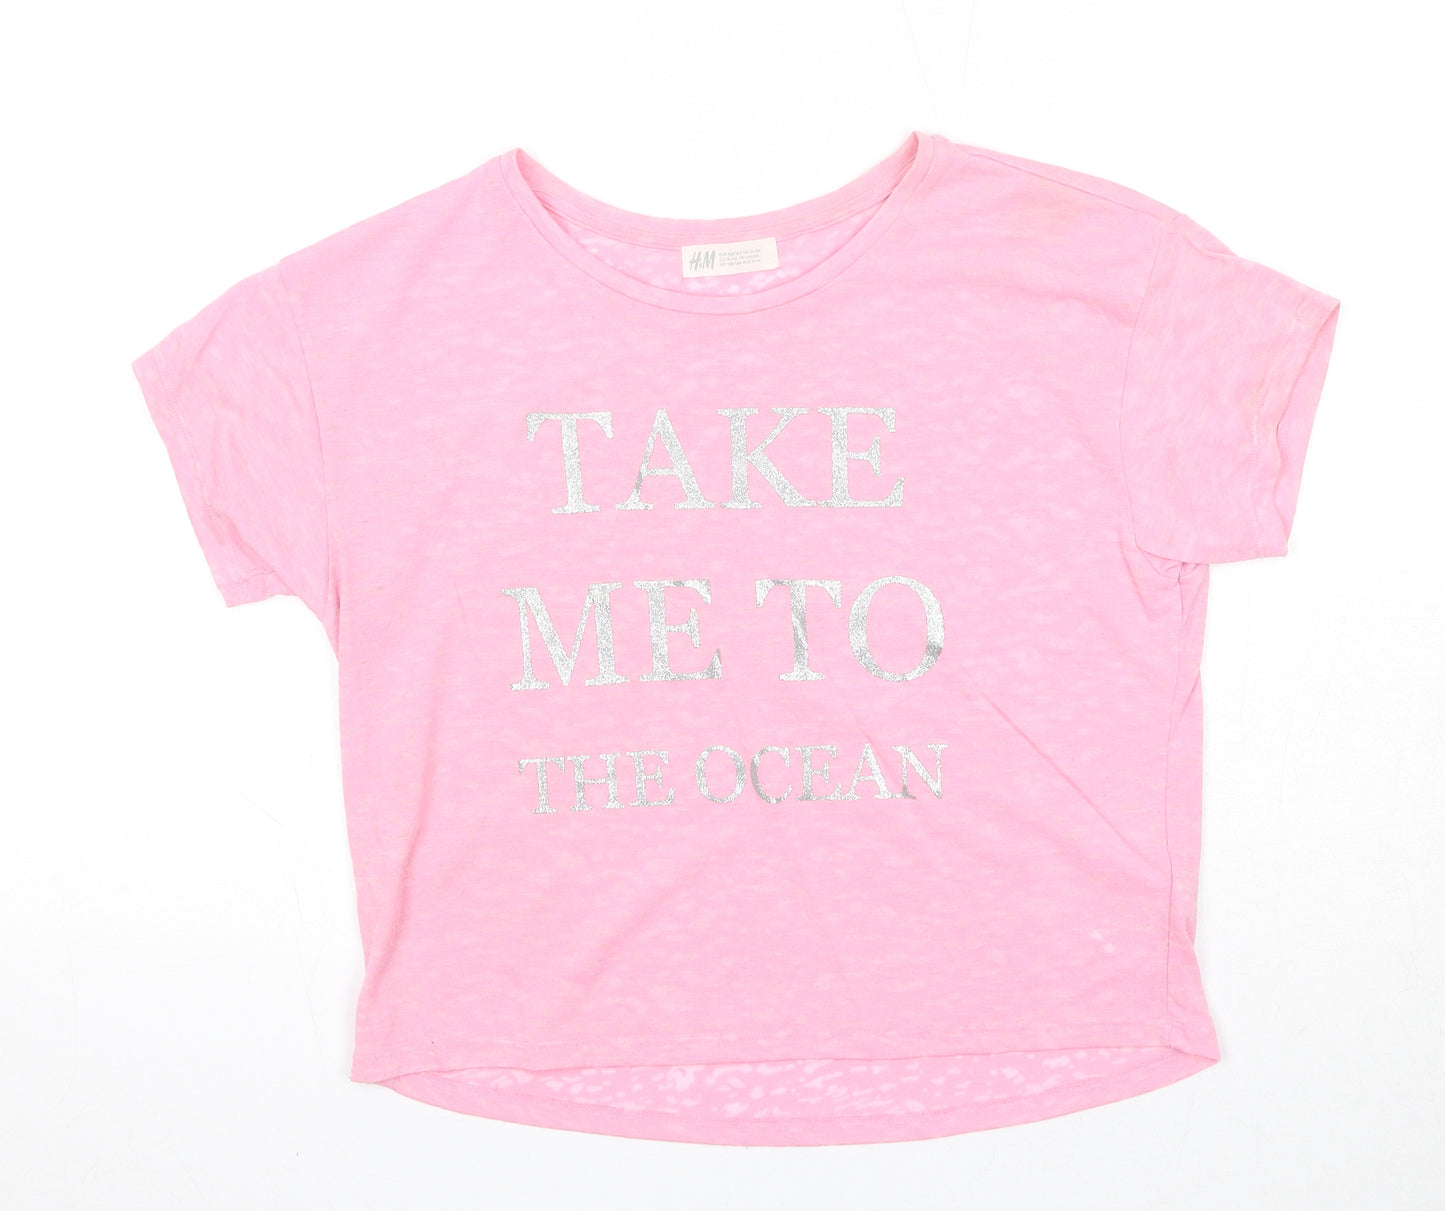 H&M Girls Pink Cotton Pullover T-Shirt Size 13-14 Years Round Neck Pullover - Take Me to the Ocean